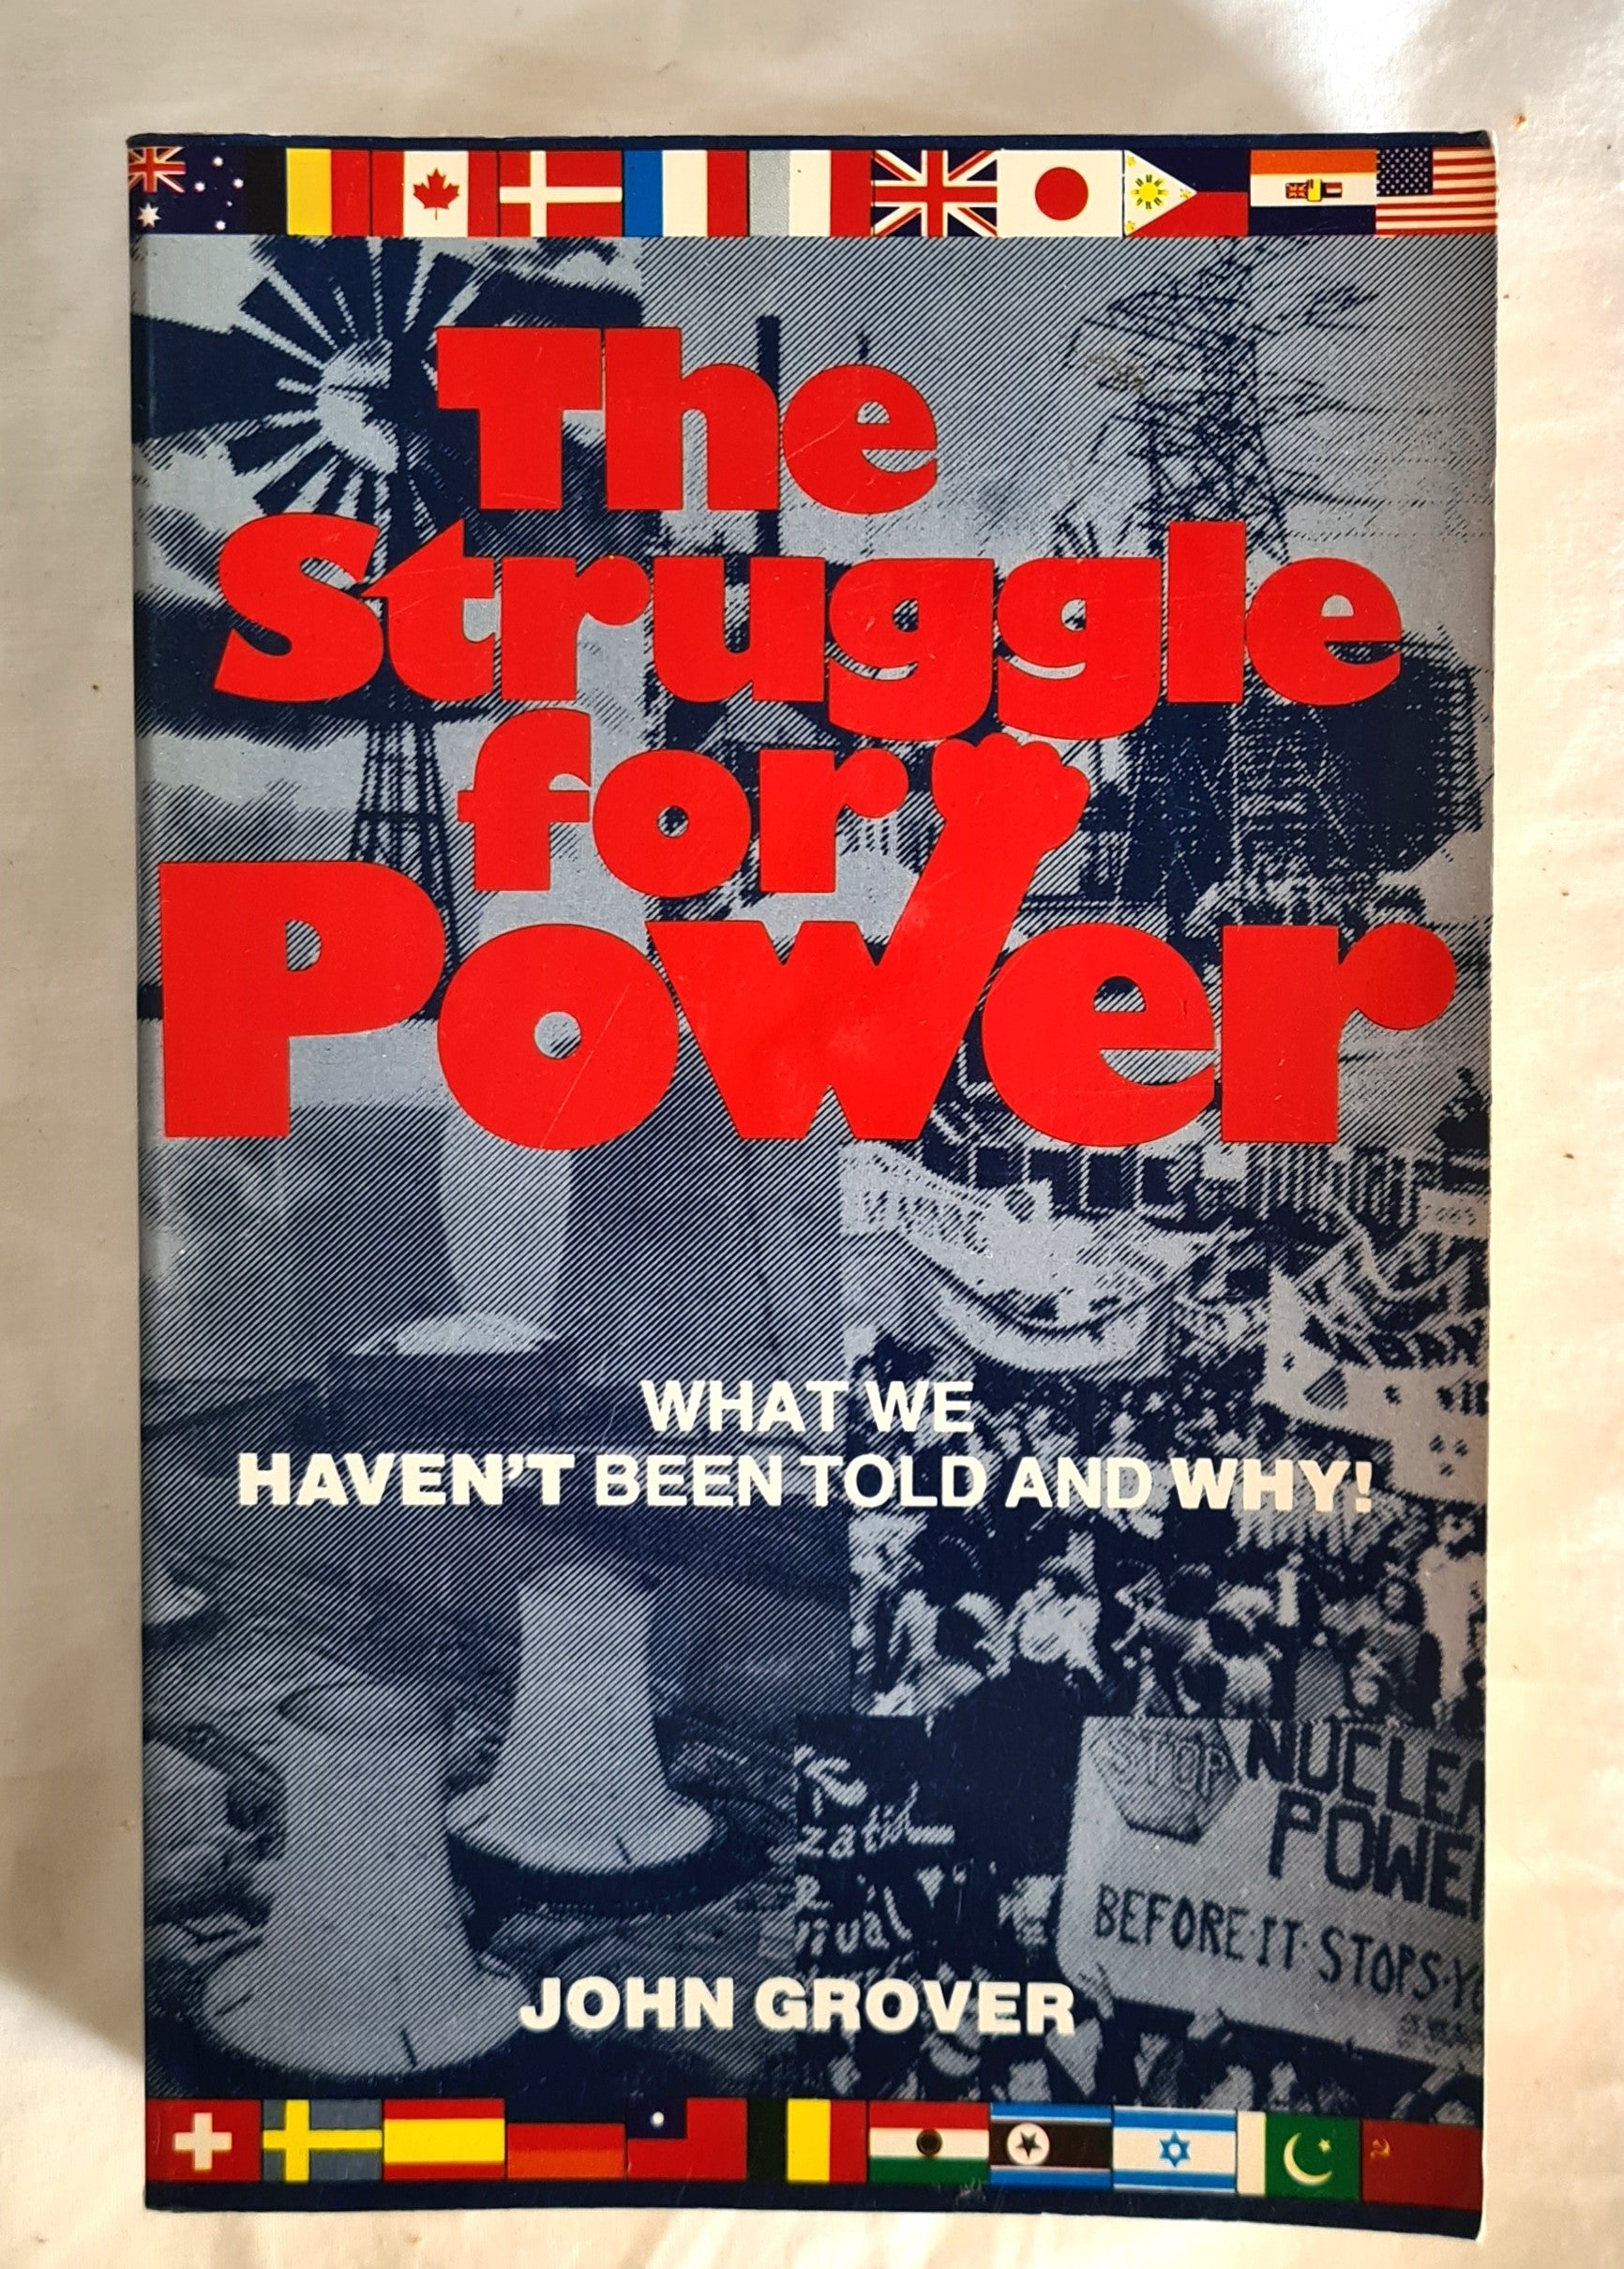 The Struggle for Power  The real issues behind the uranium and nuclear argument, viewed both internationally and nationally  by John Grover